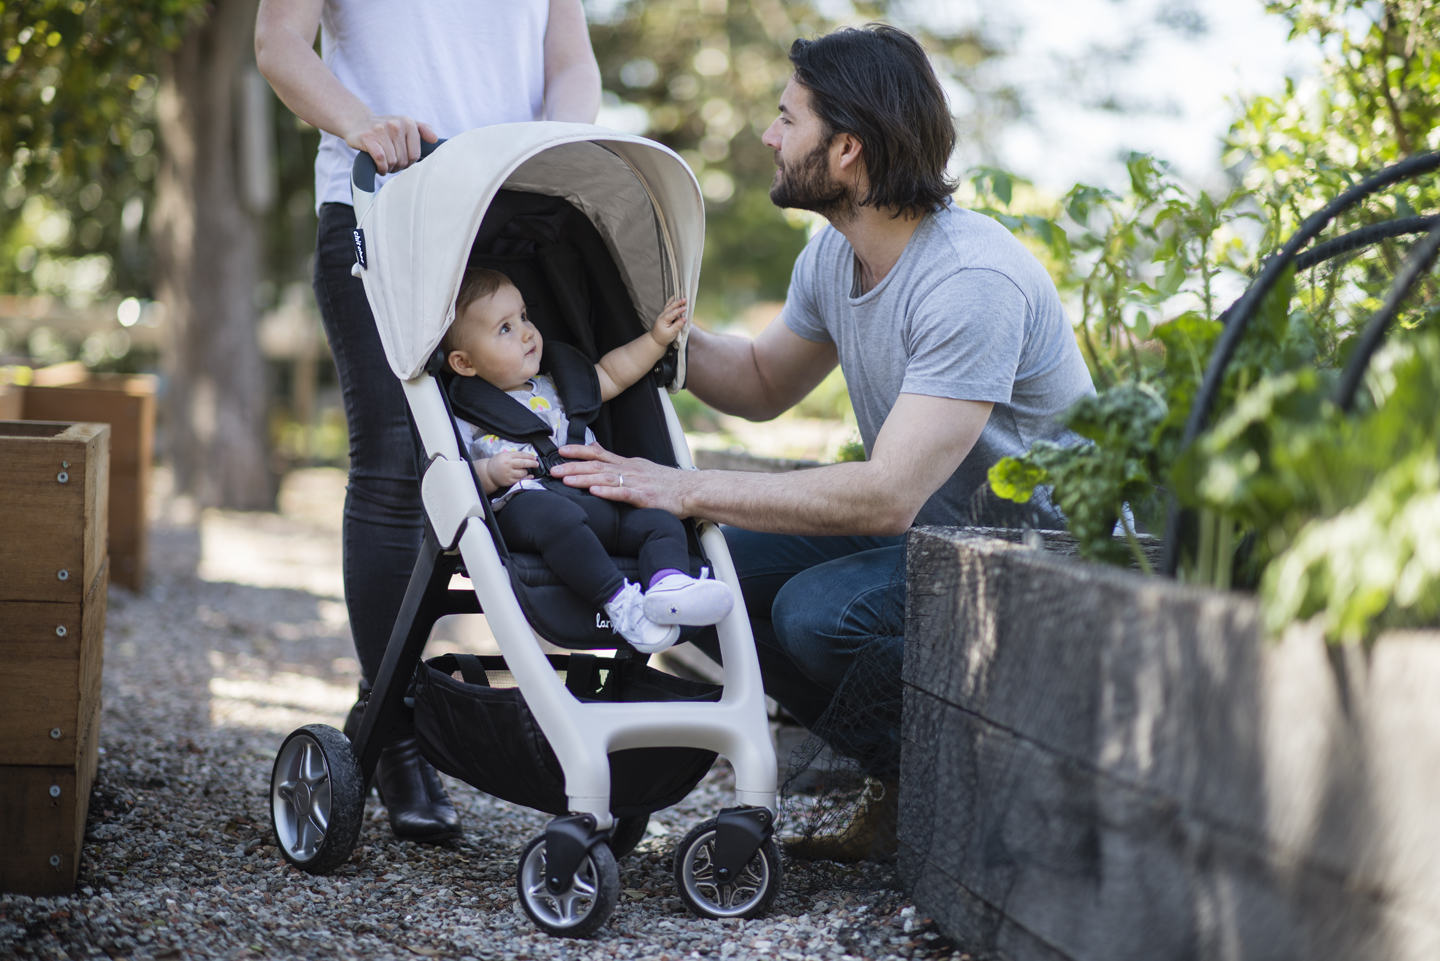 Larktale Strollers: Gear Up for Endless Adventures with Babe